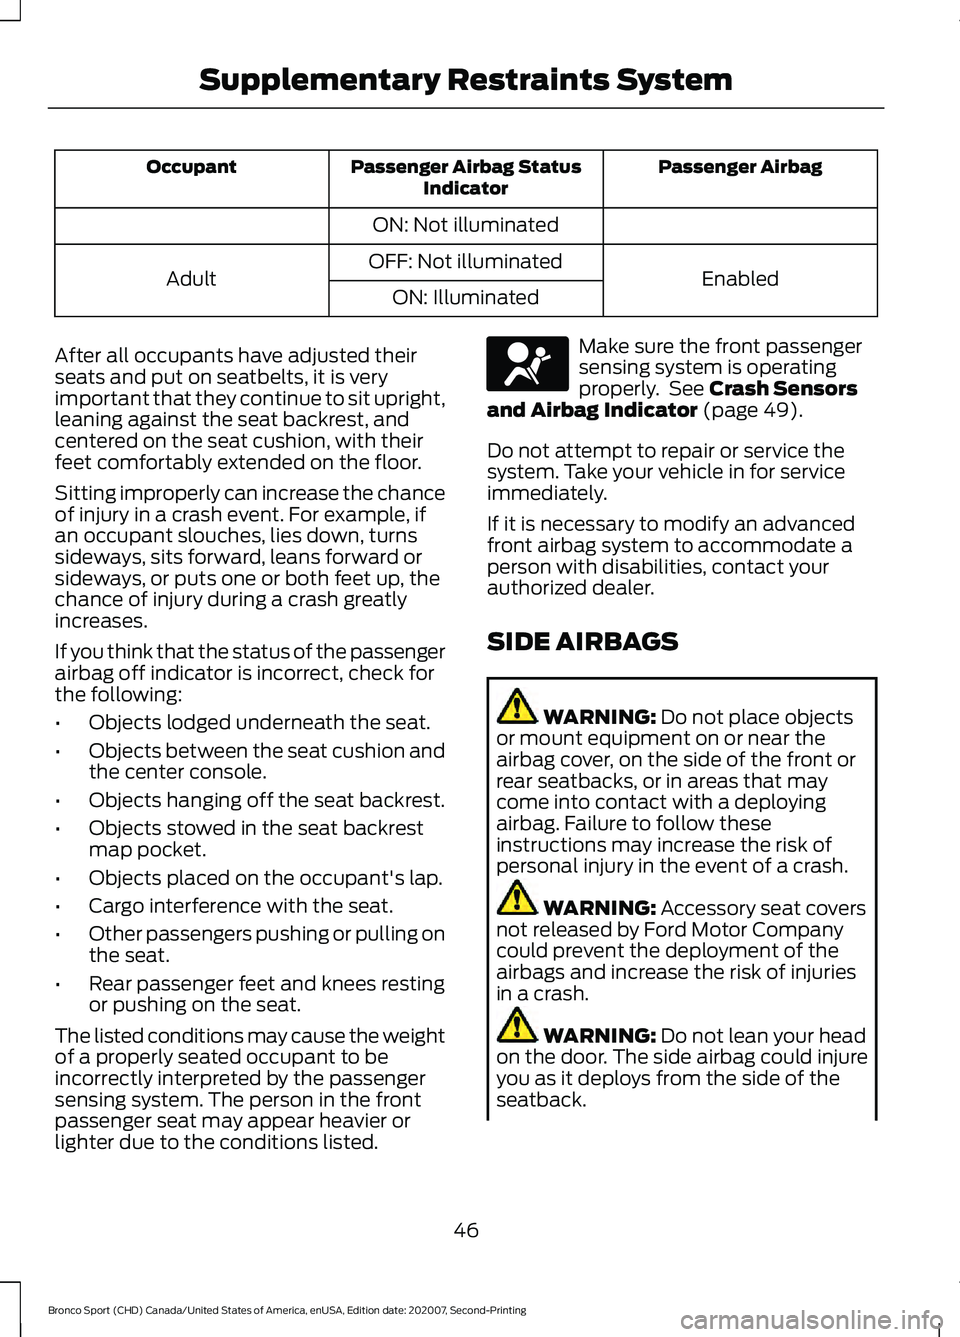 FORD BRONCO SPORT 2021 Service Manual Passenger Airbag
Passenger Airbag Status
Indicator
Occupant
ON: Not illuminated Enabled
OFF: Not illuminated
Adult
ON: Illuminated
After all occupants have adjusted their
seats and put on seatbelts, i